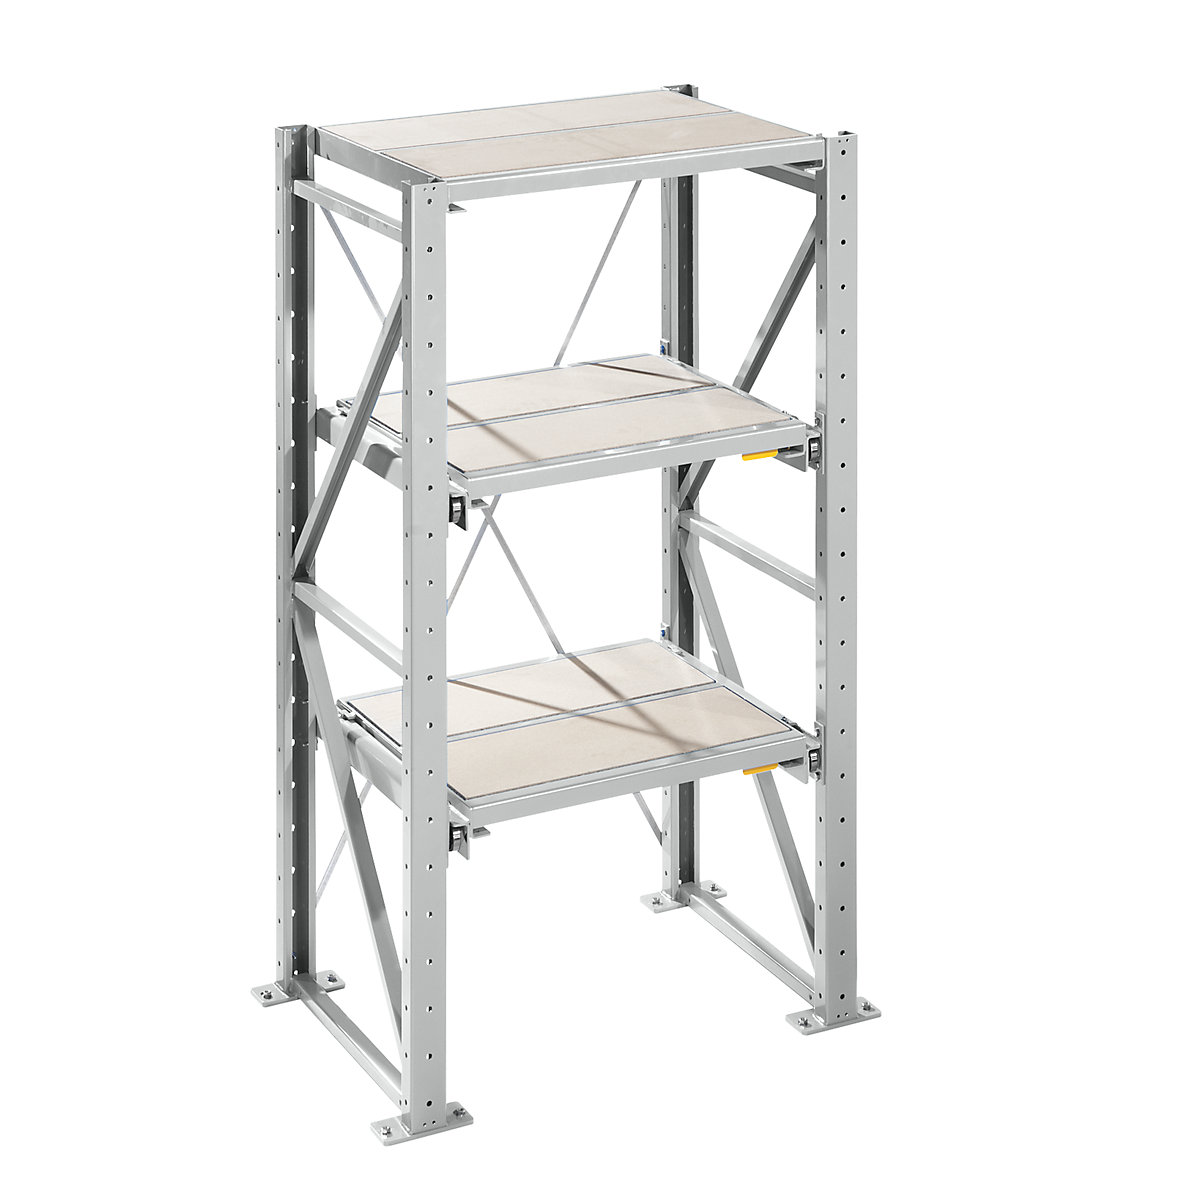 Heavy duty pull-out shelving unit – LISTA